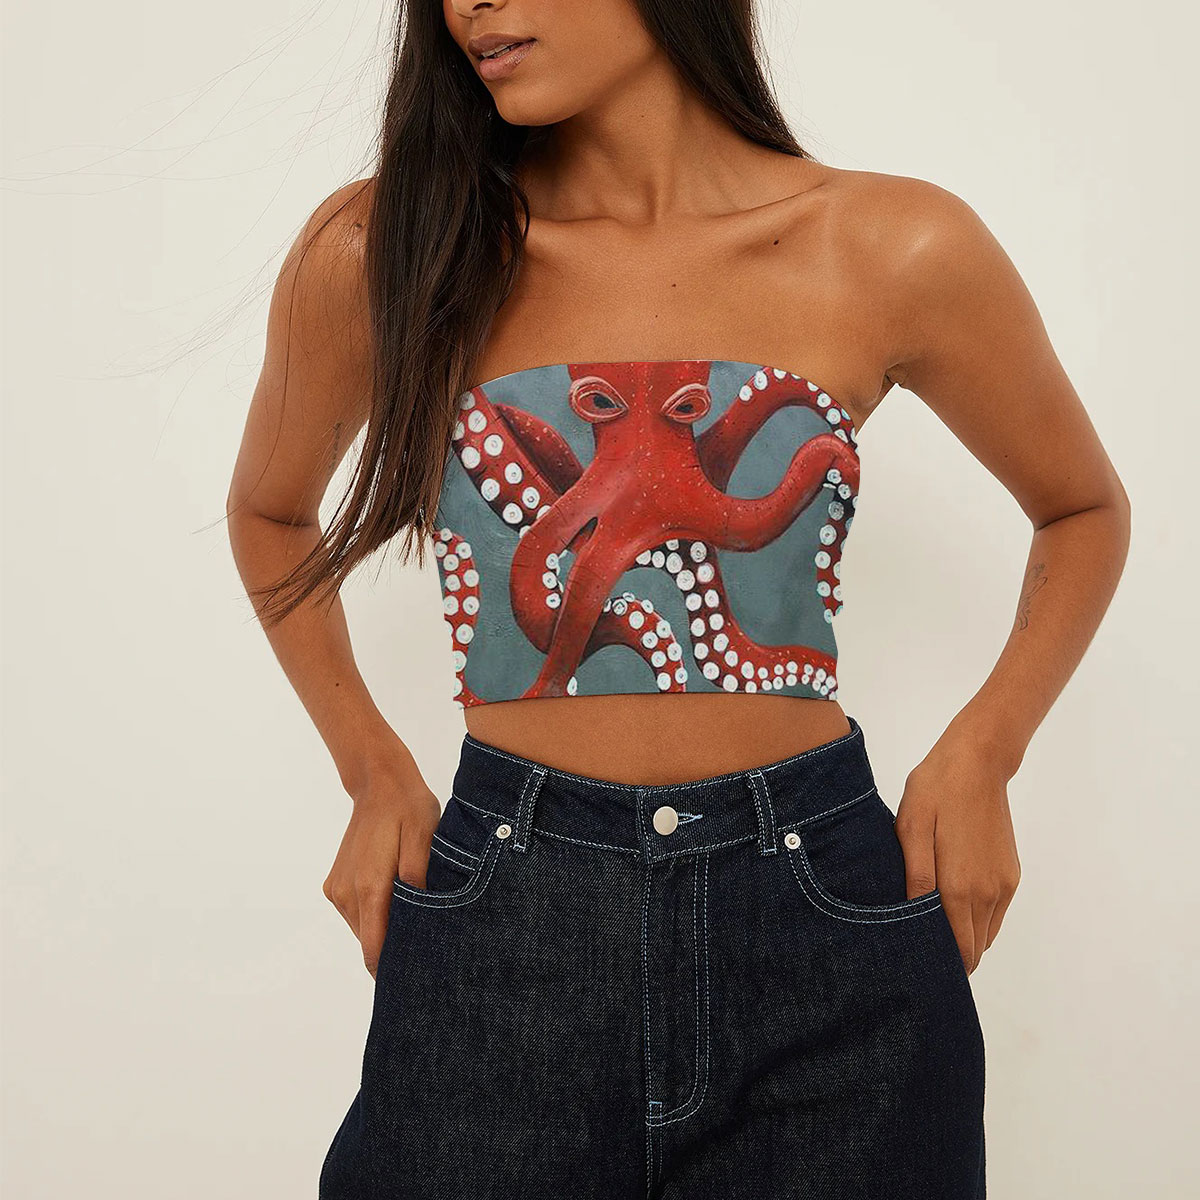 Giant Red Octopus Tube Top